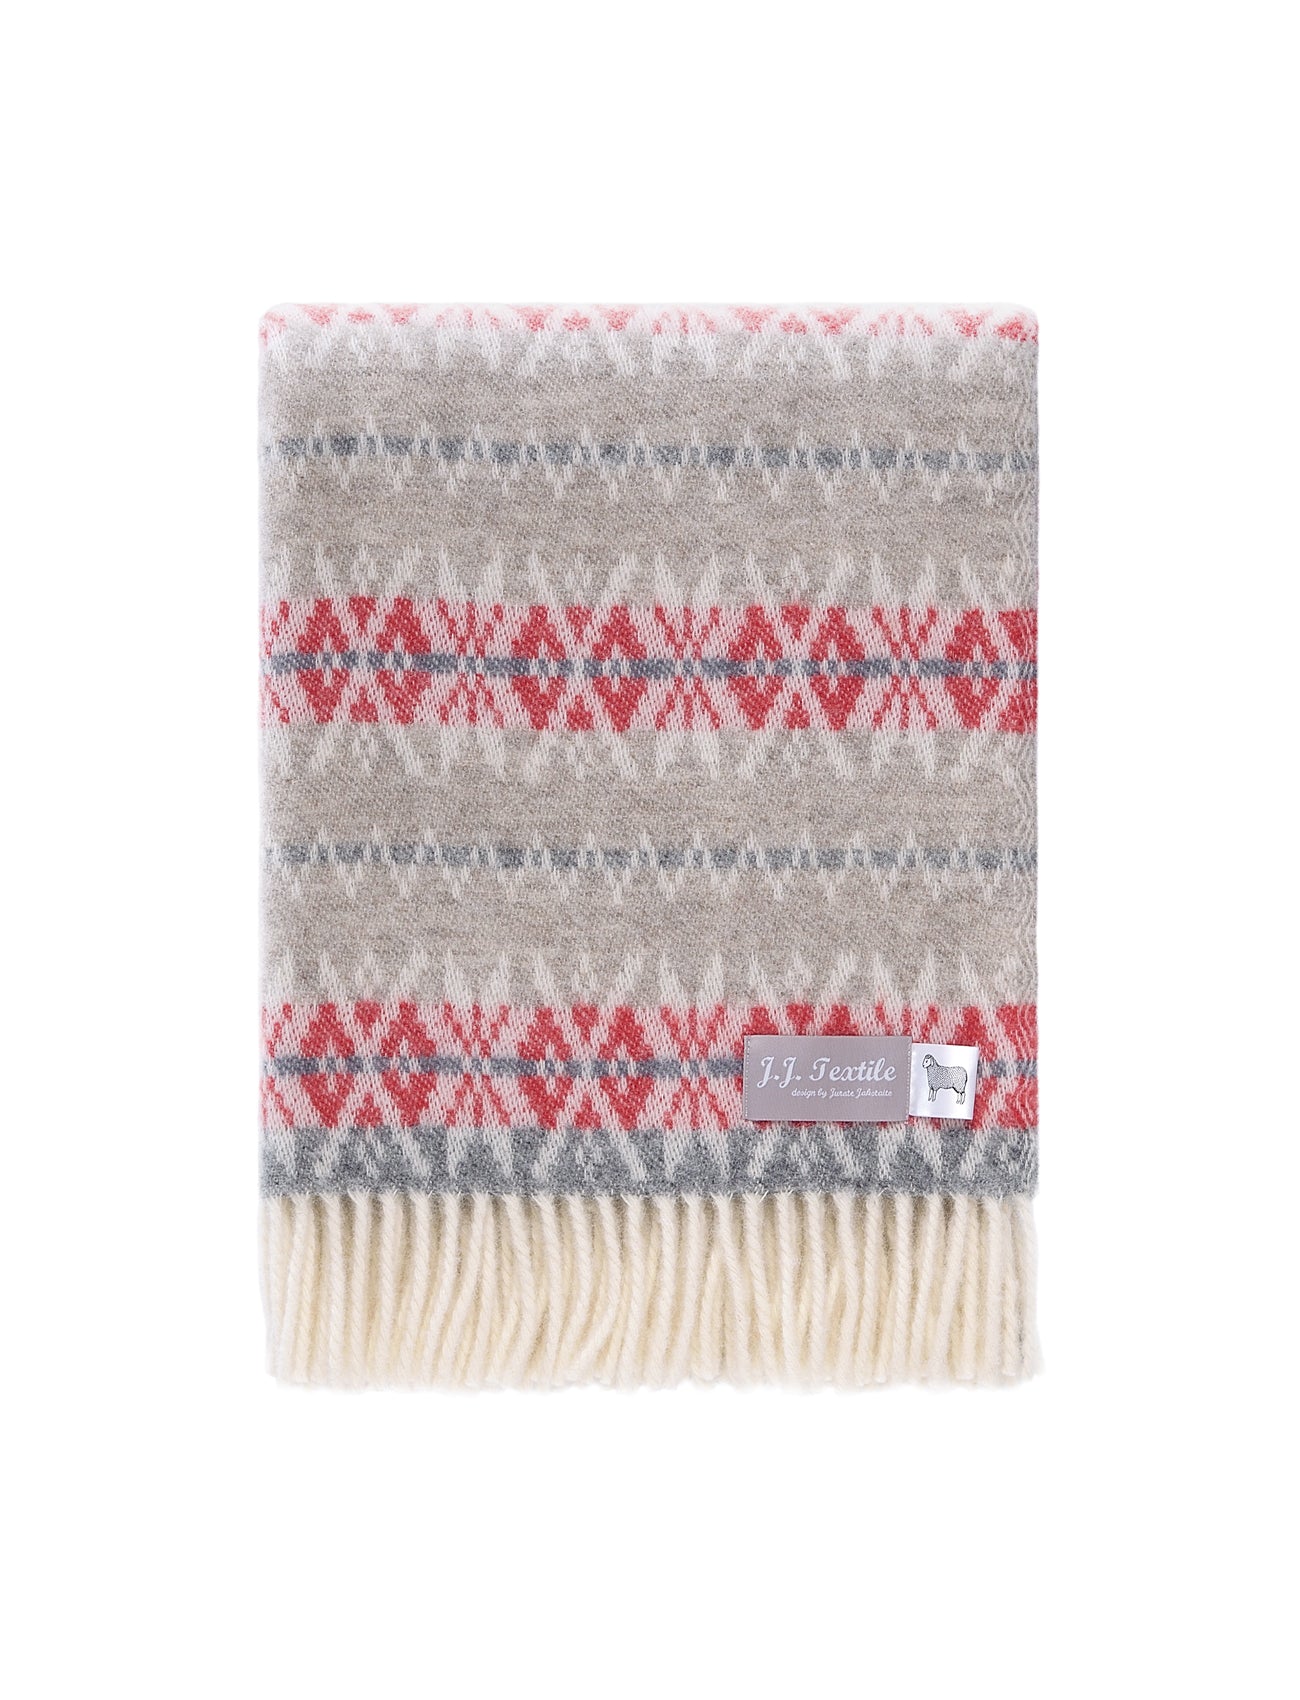 Nord Wool Throw blanket in grey, taupe and vibrant red tones, with snowflake pattern on edges